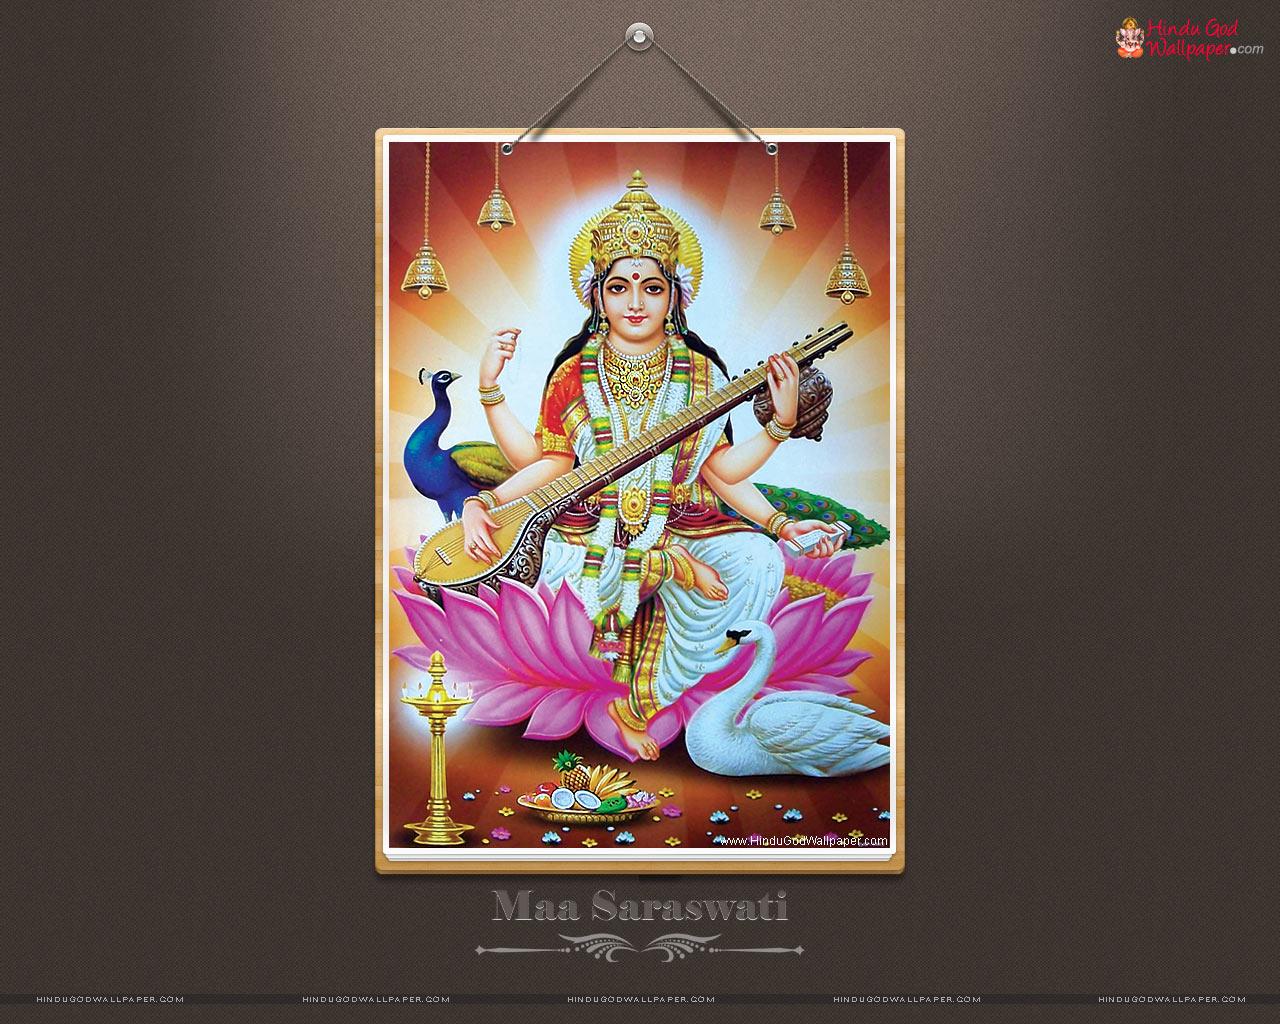 Saraswati Puja 2022 Images & Happy Basant Panchami HD Wallpapers for Free  Download Online: New WhatsApp Stickers, GIFs, SMS and Quotes To Celebrate  the Auspicious Day | 🙏🏻 LatestLY